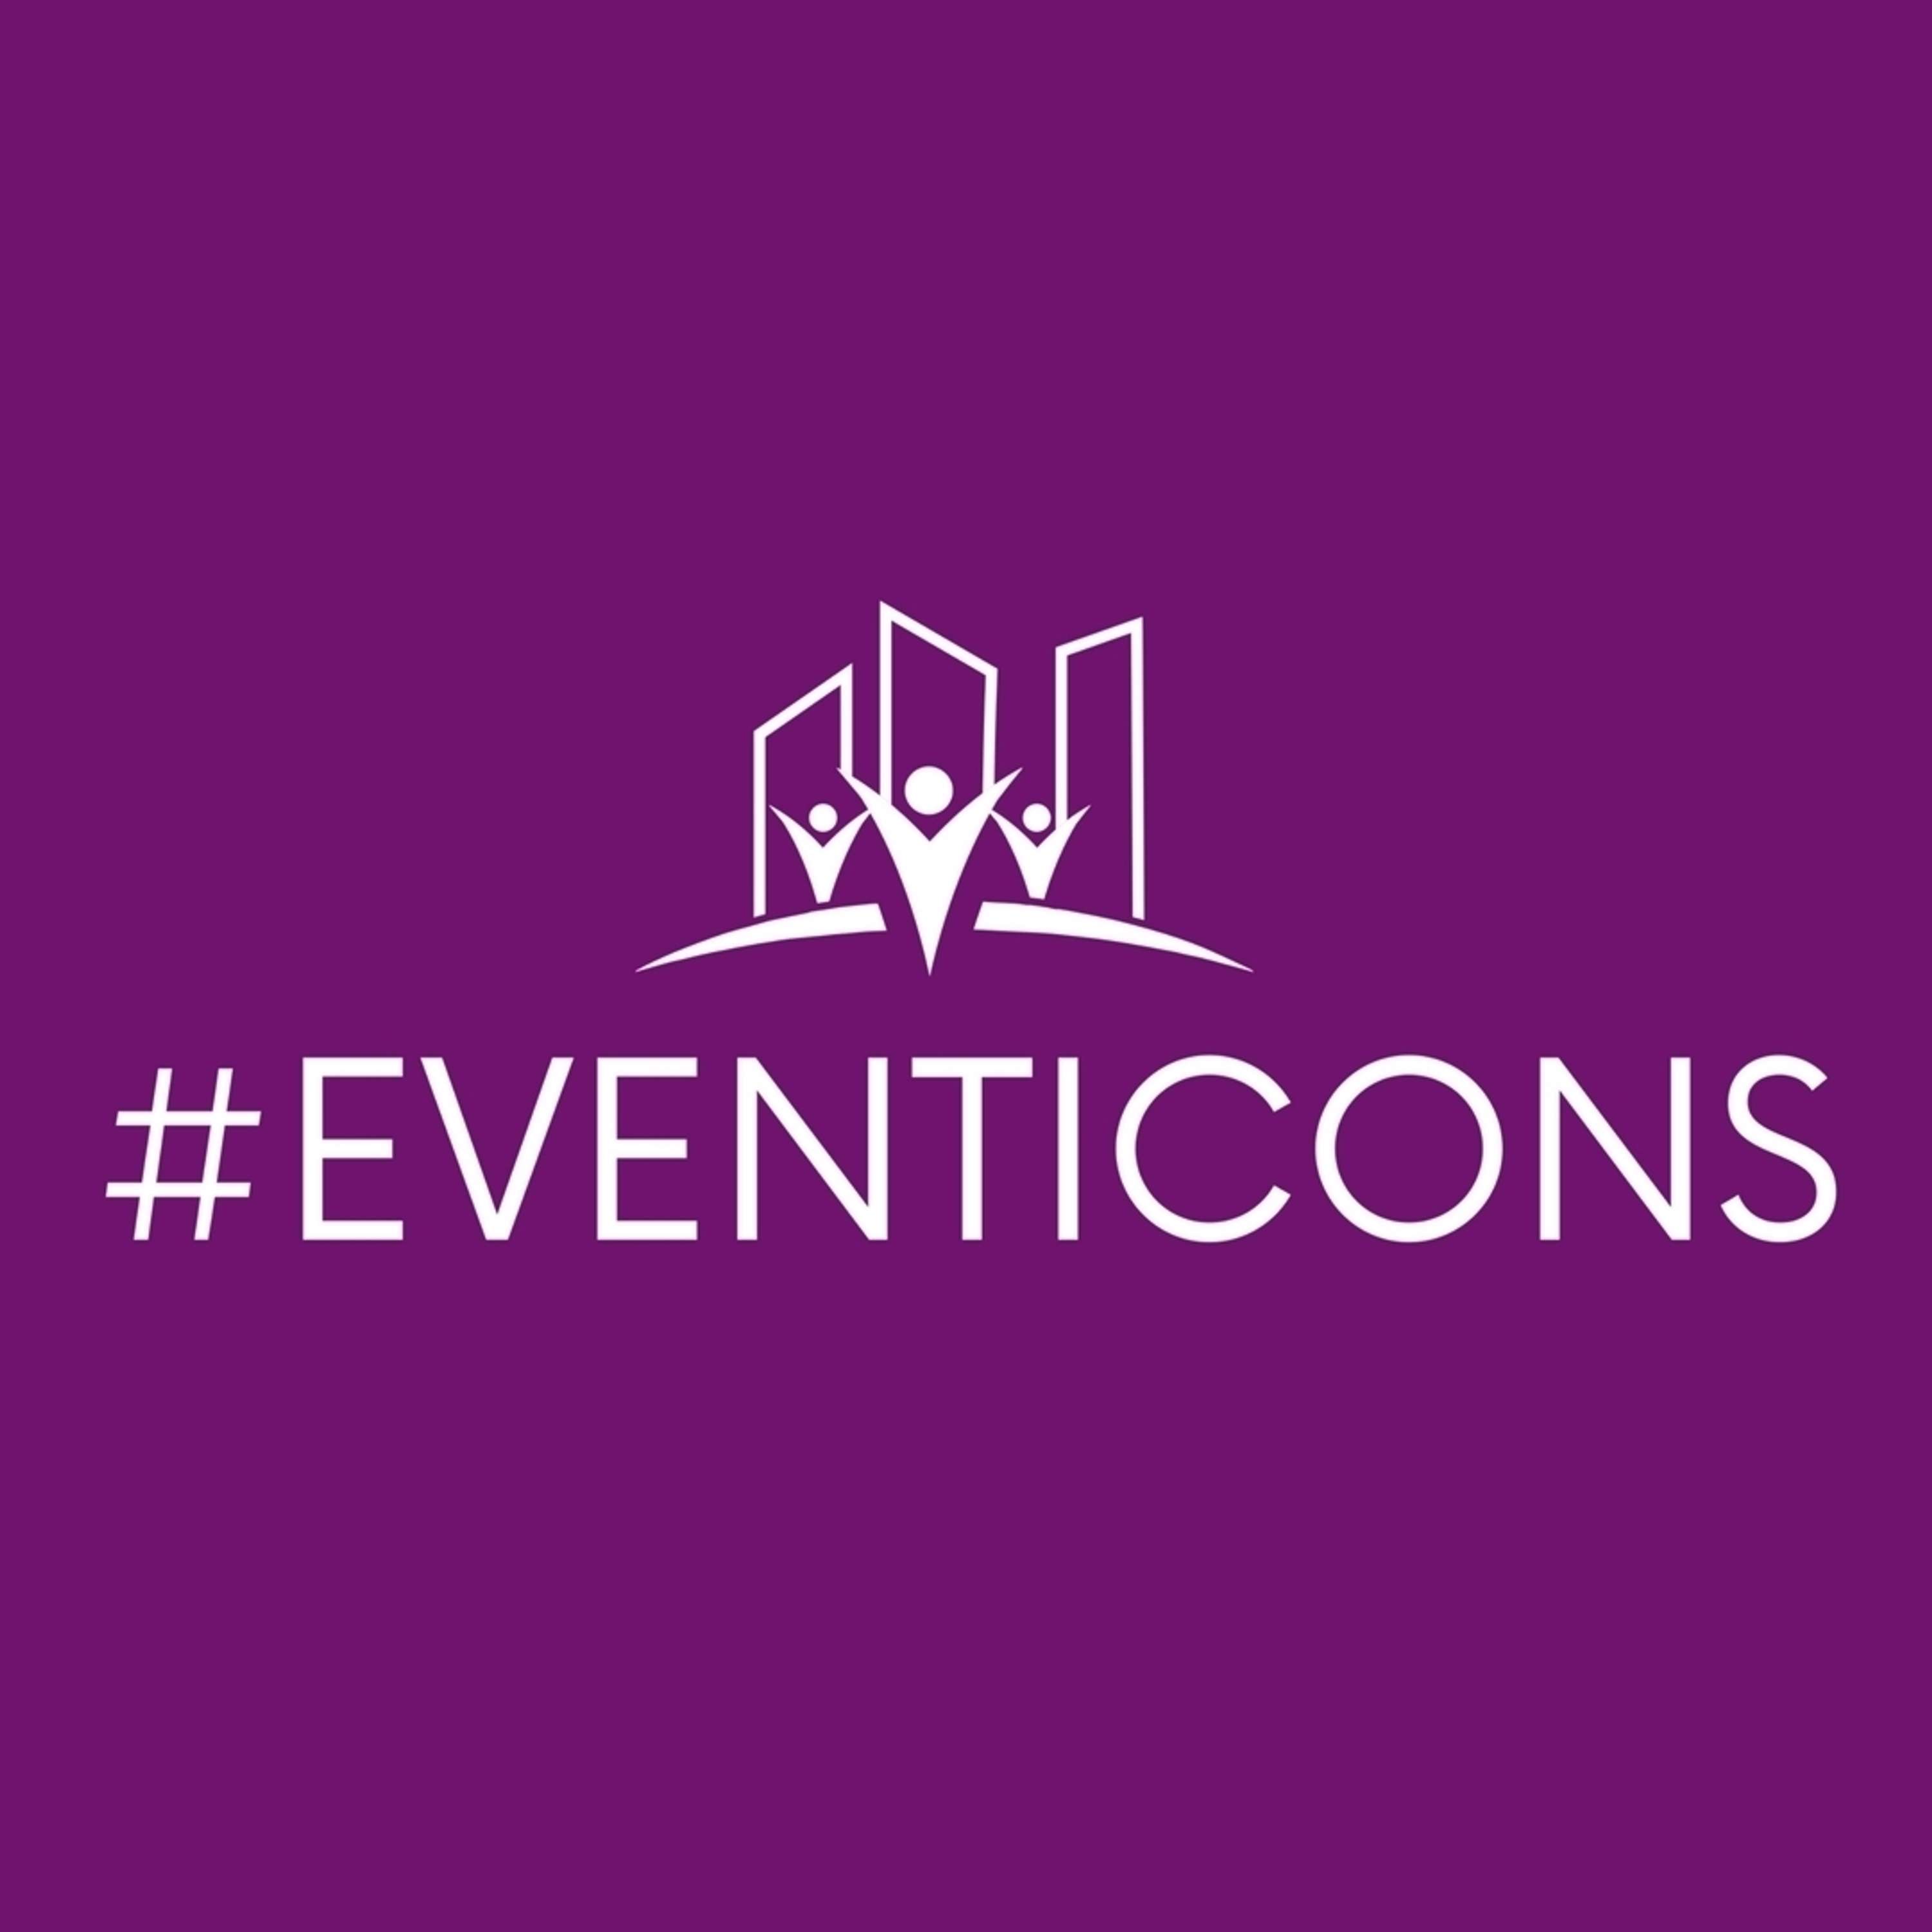 Guide To Best Business Practices For Event Professionals